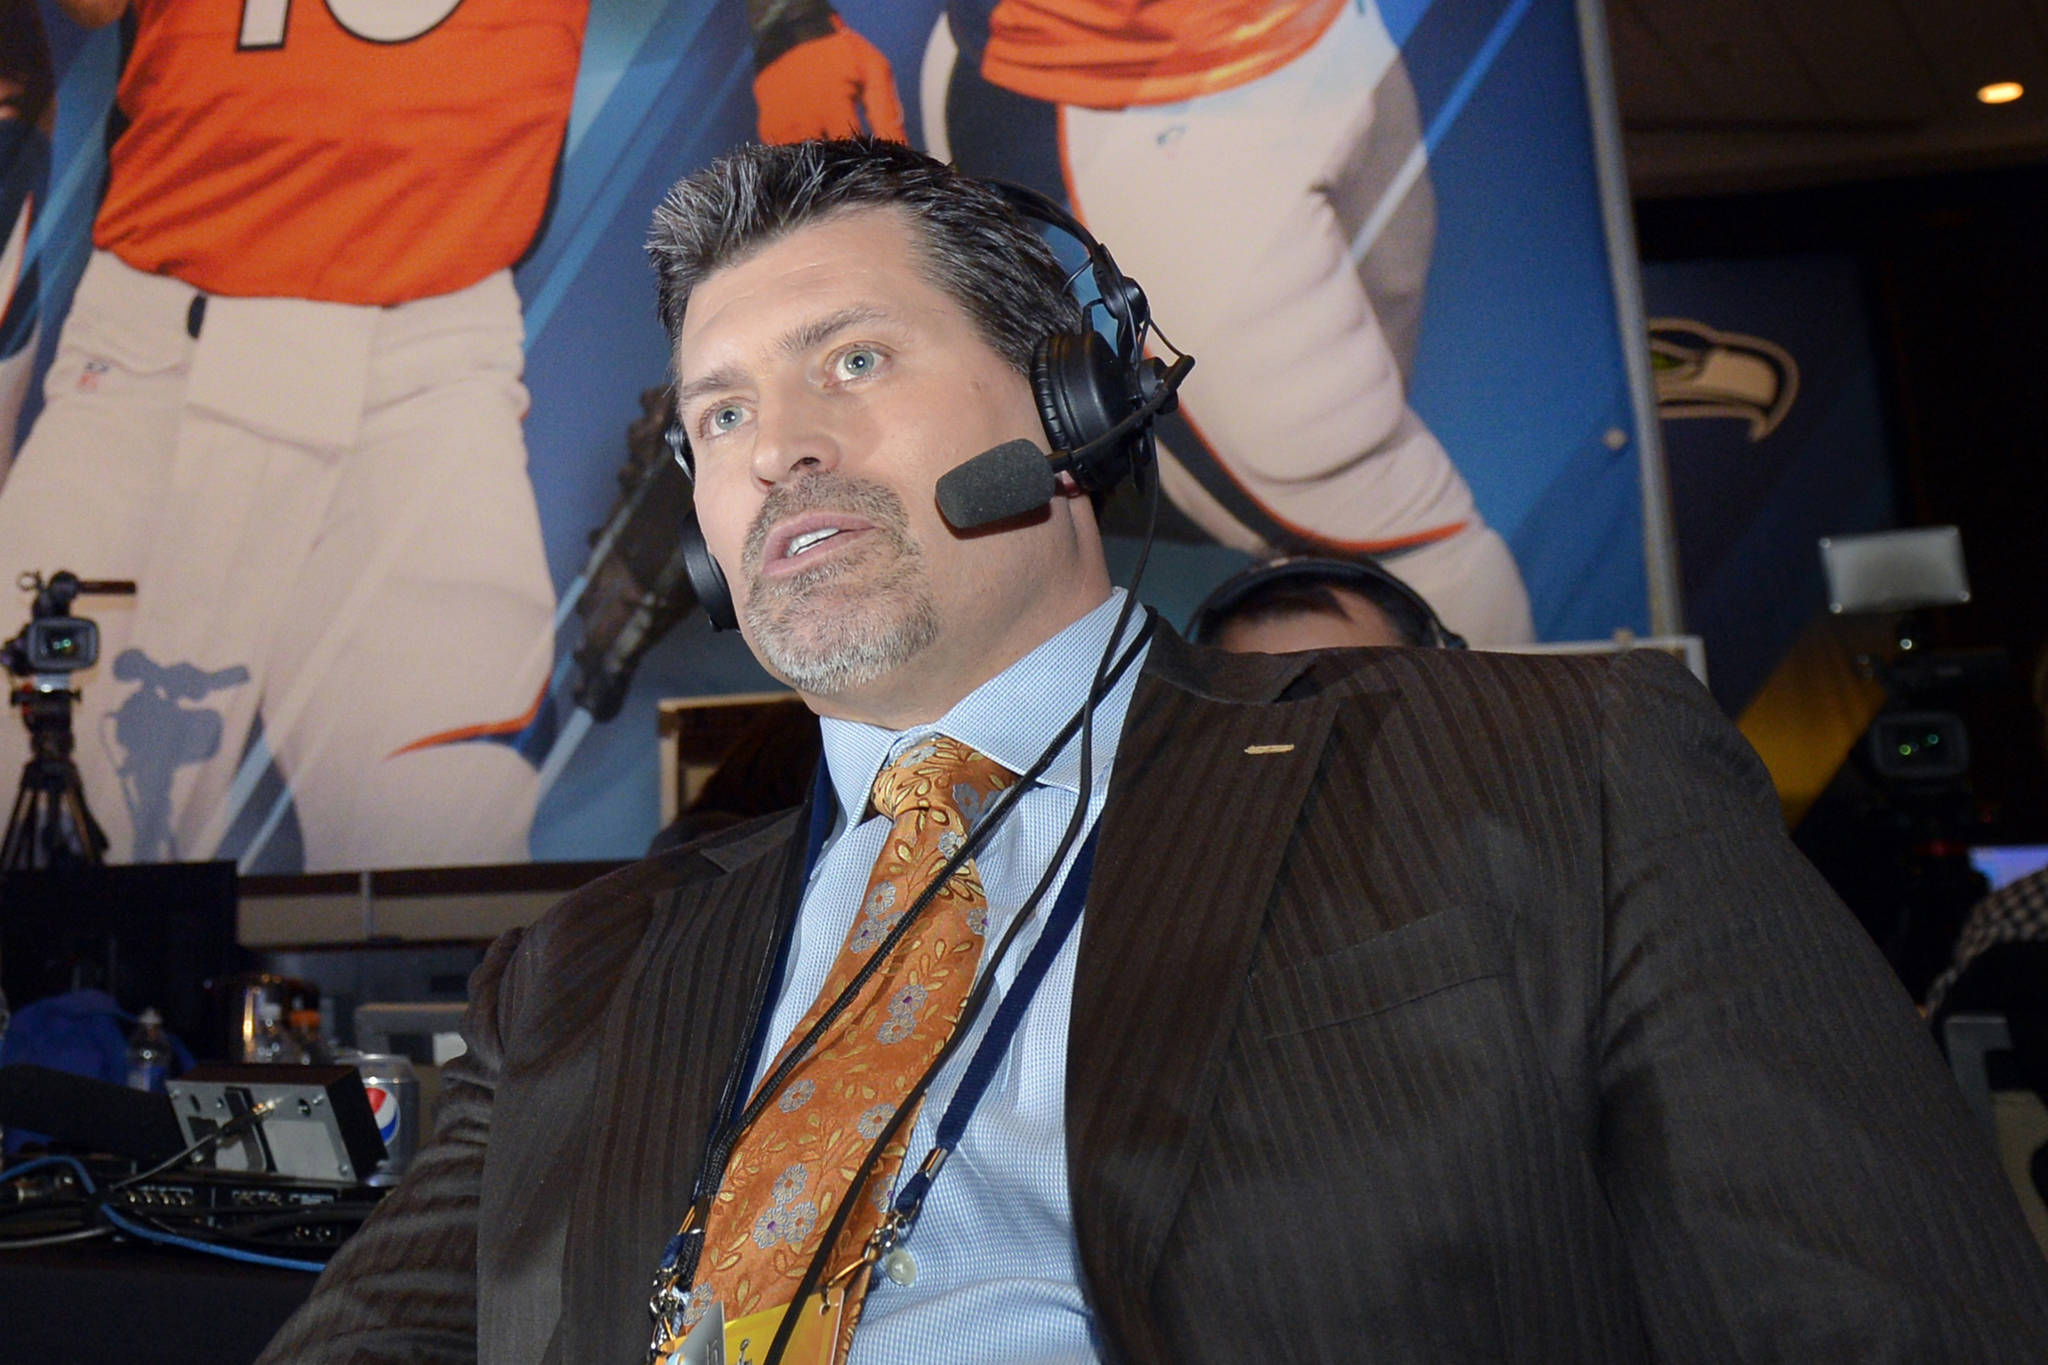 FILE - This Jan. 29, 2014 file photo shows former Denver Broncos offensive lineman and ESPN analyst Mark Schlereth in New York.   Schlereth returned home to Alaska this week to encourage people to get the COVID-19 vaccine.  The Service High alumnus made a halftime appearance Friday, Aug. 20, 2021 at West High, where his alma mater squared off against the West Eagles.  (AP Photo/Jack Dempsey, File)